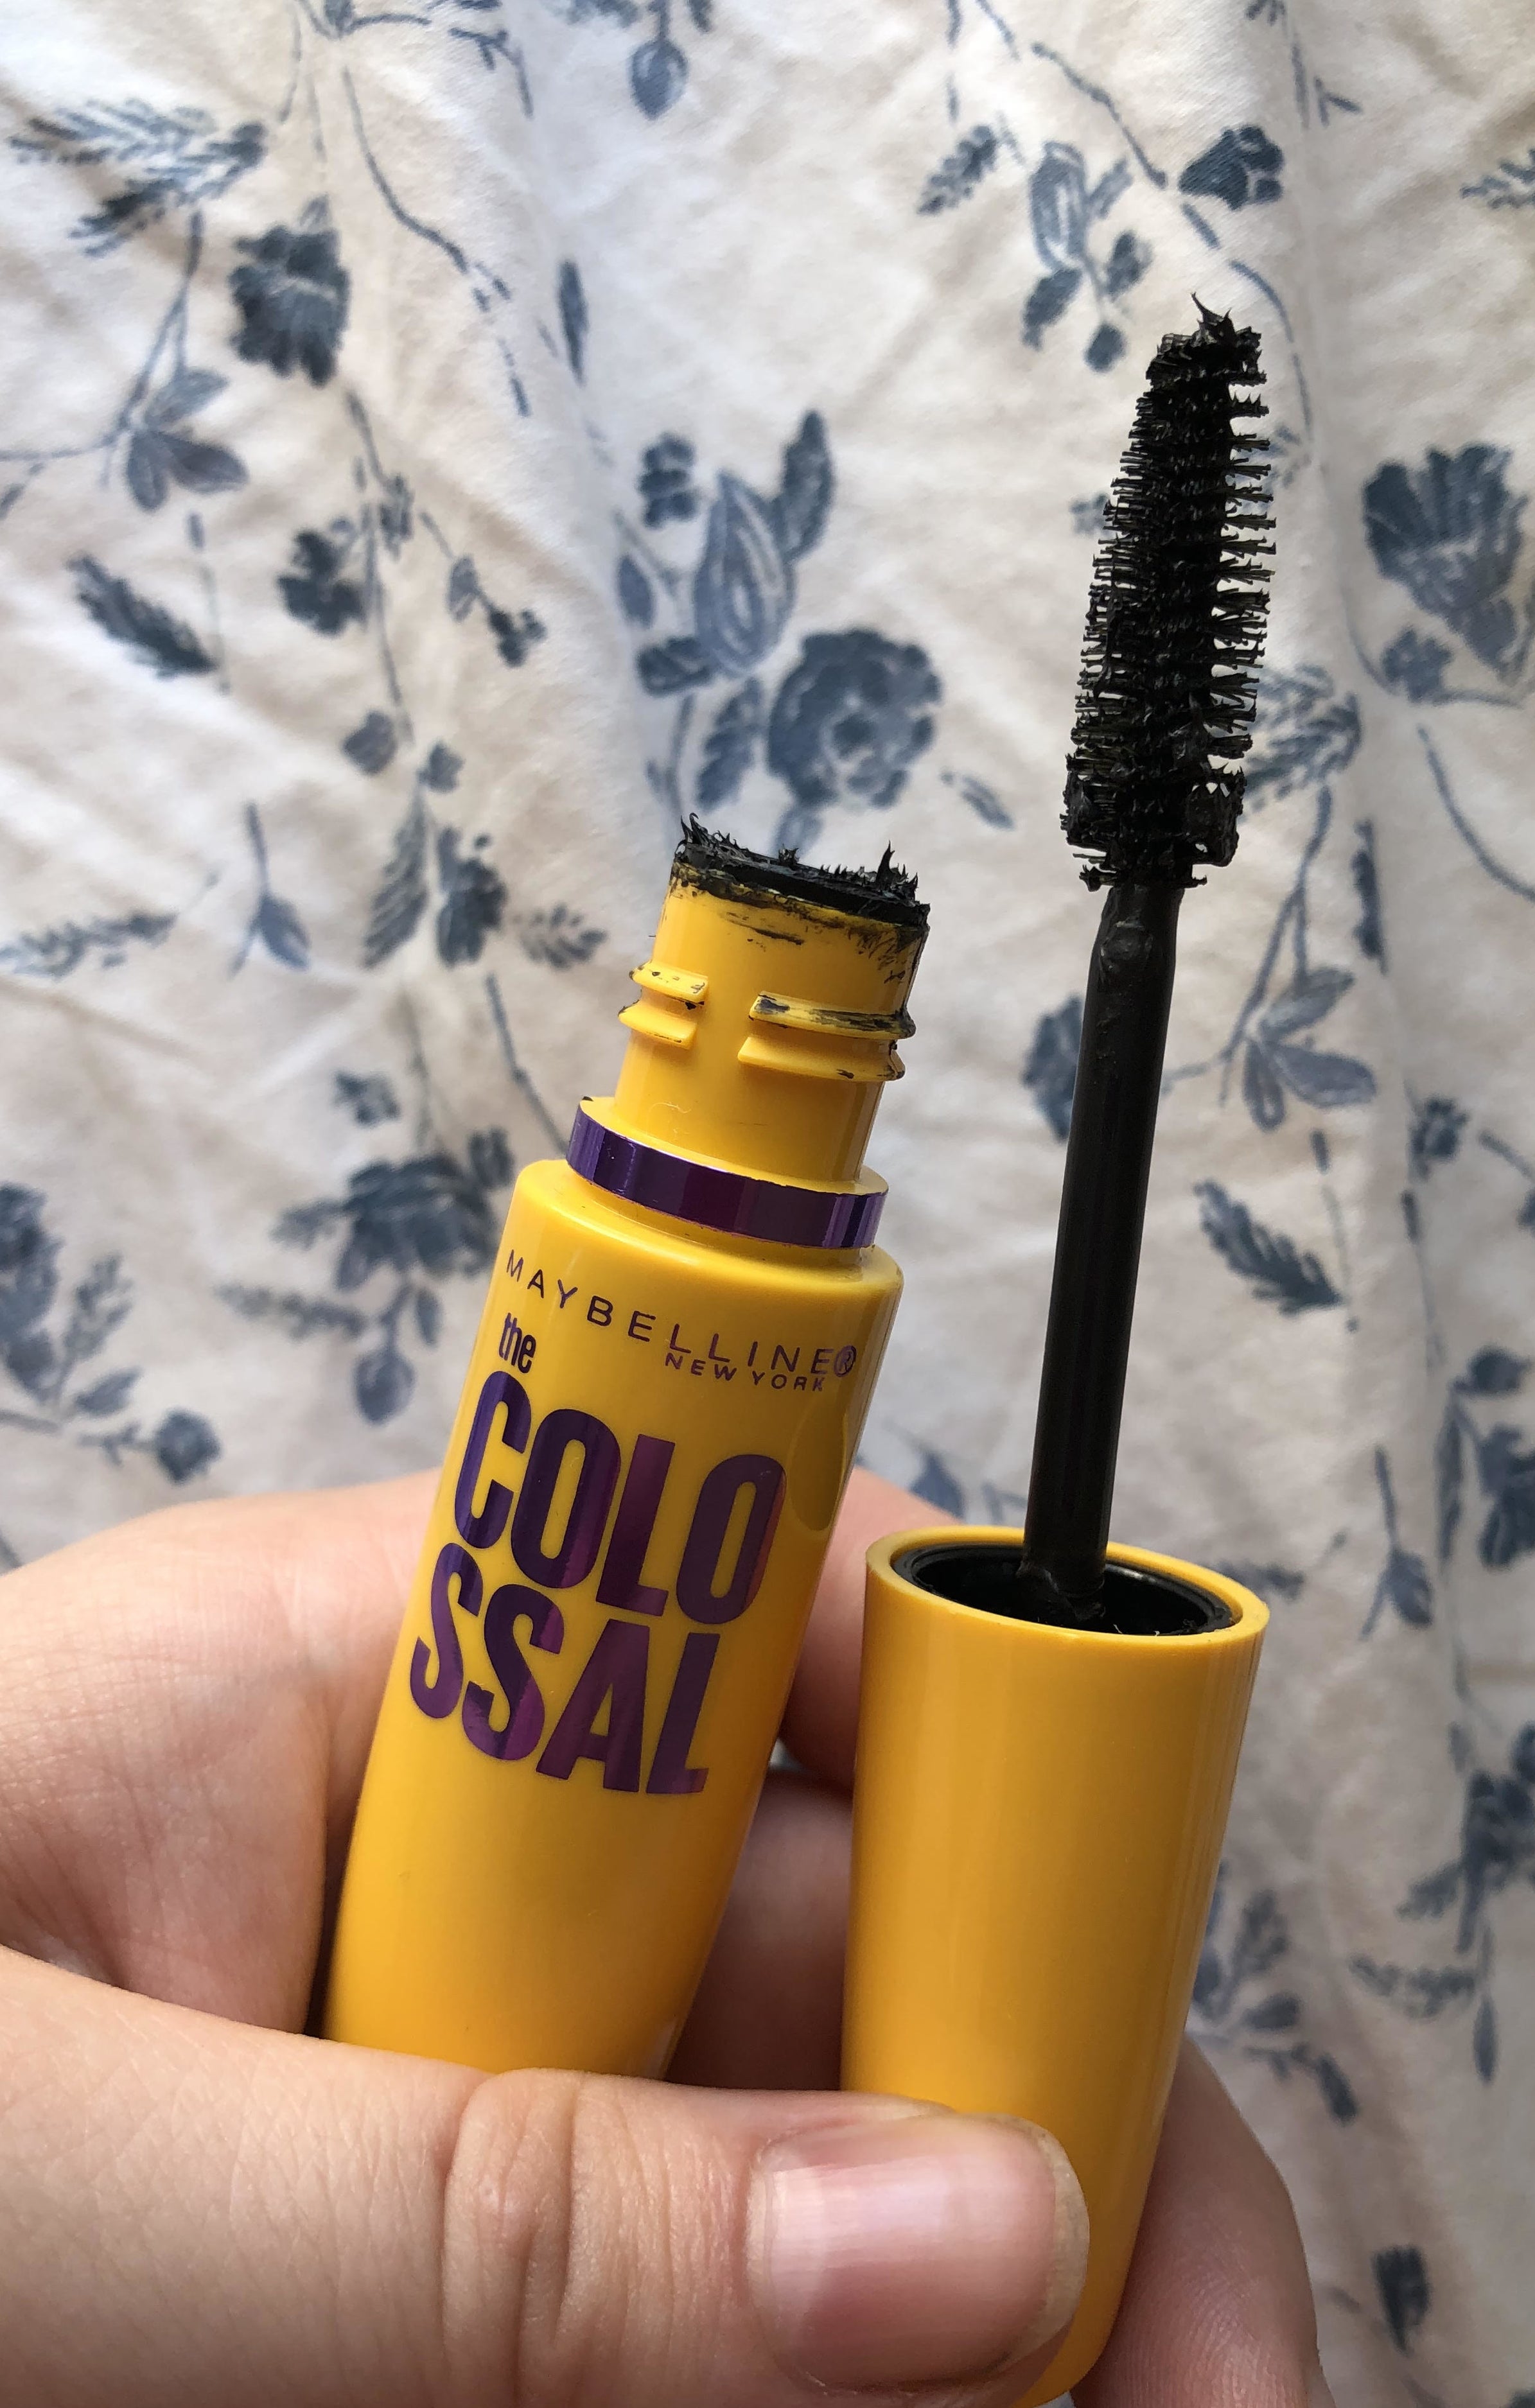 Maybelline Colossal Mascara Review: 15-Year Holy Grail